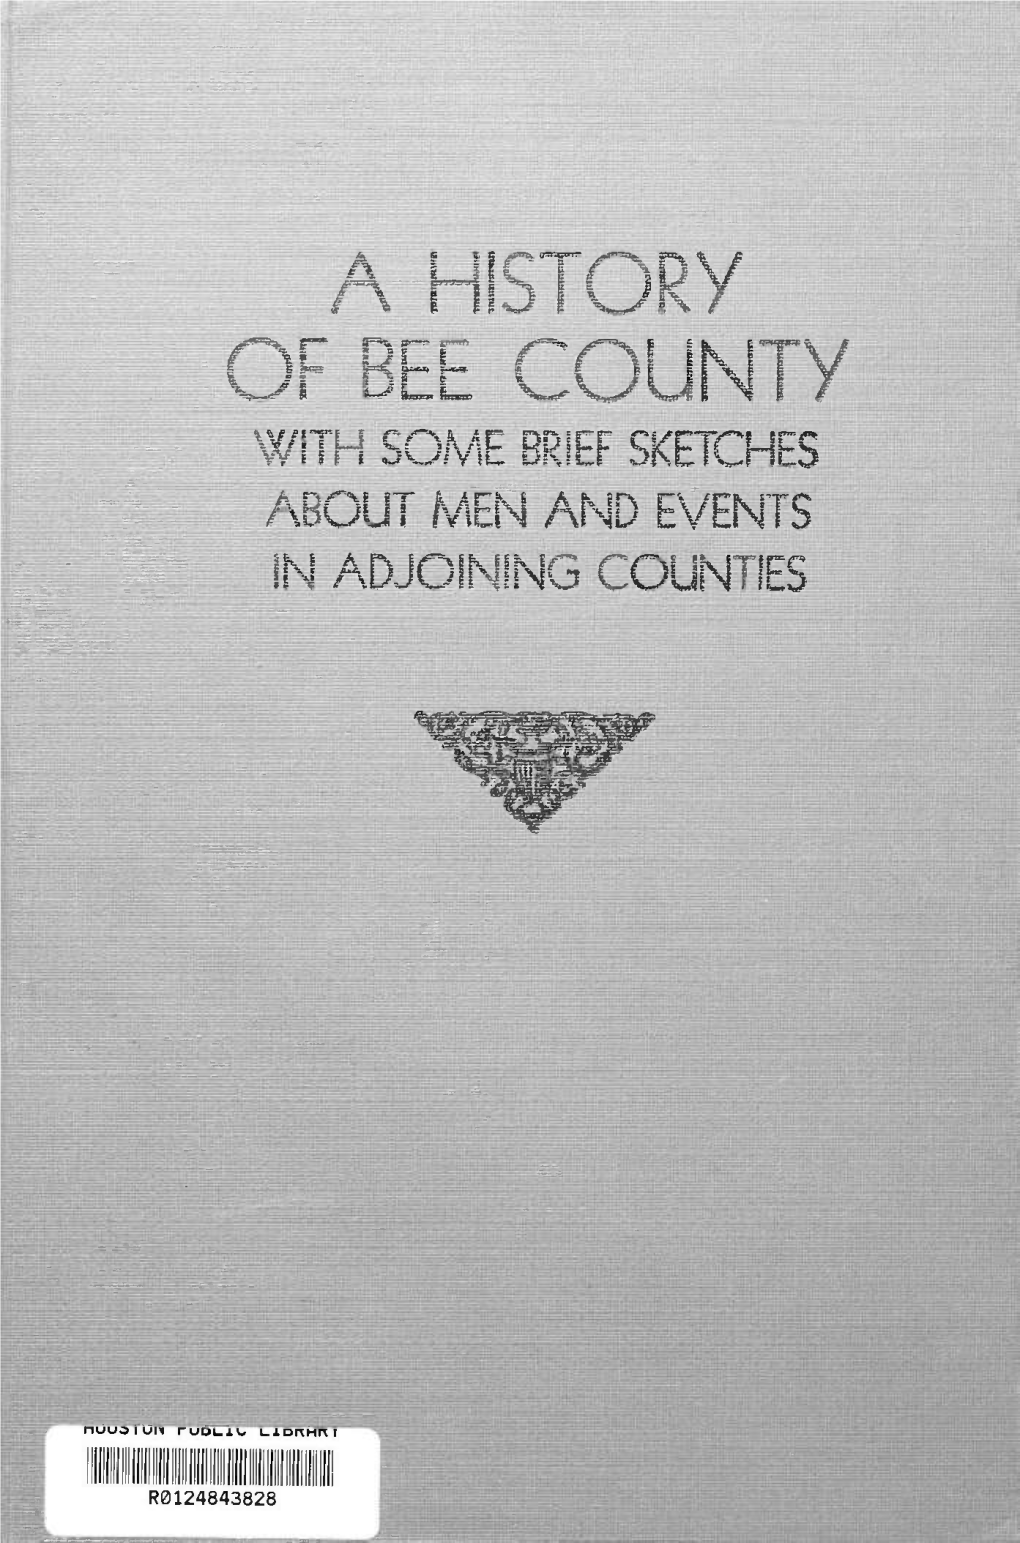 History of Bee County.Pdf